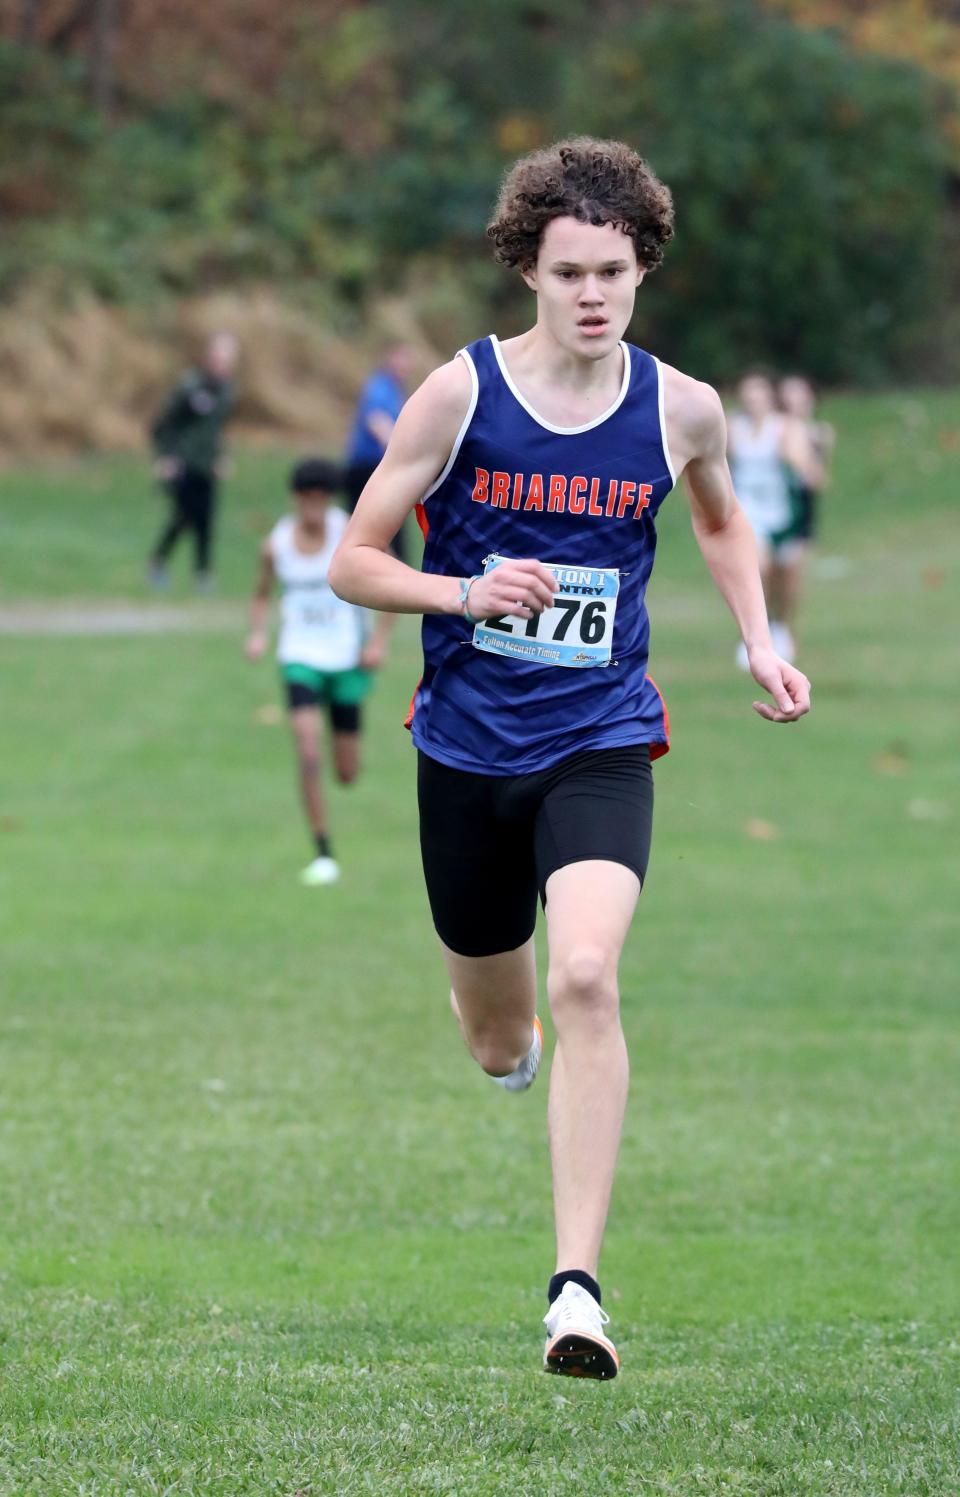 Miles Chamberlain from Briarcliff approaches the finish line as athletes compete in the boys Class C Section 1 Cross Country Championships at Bowdoin Park in Wappingers Falls, Nov. 4, 2023.